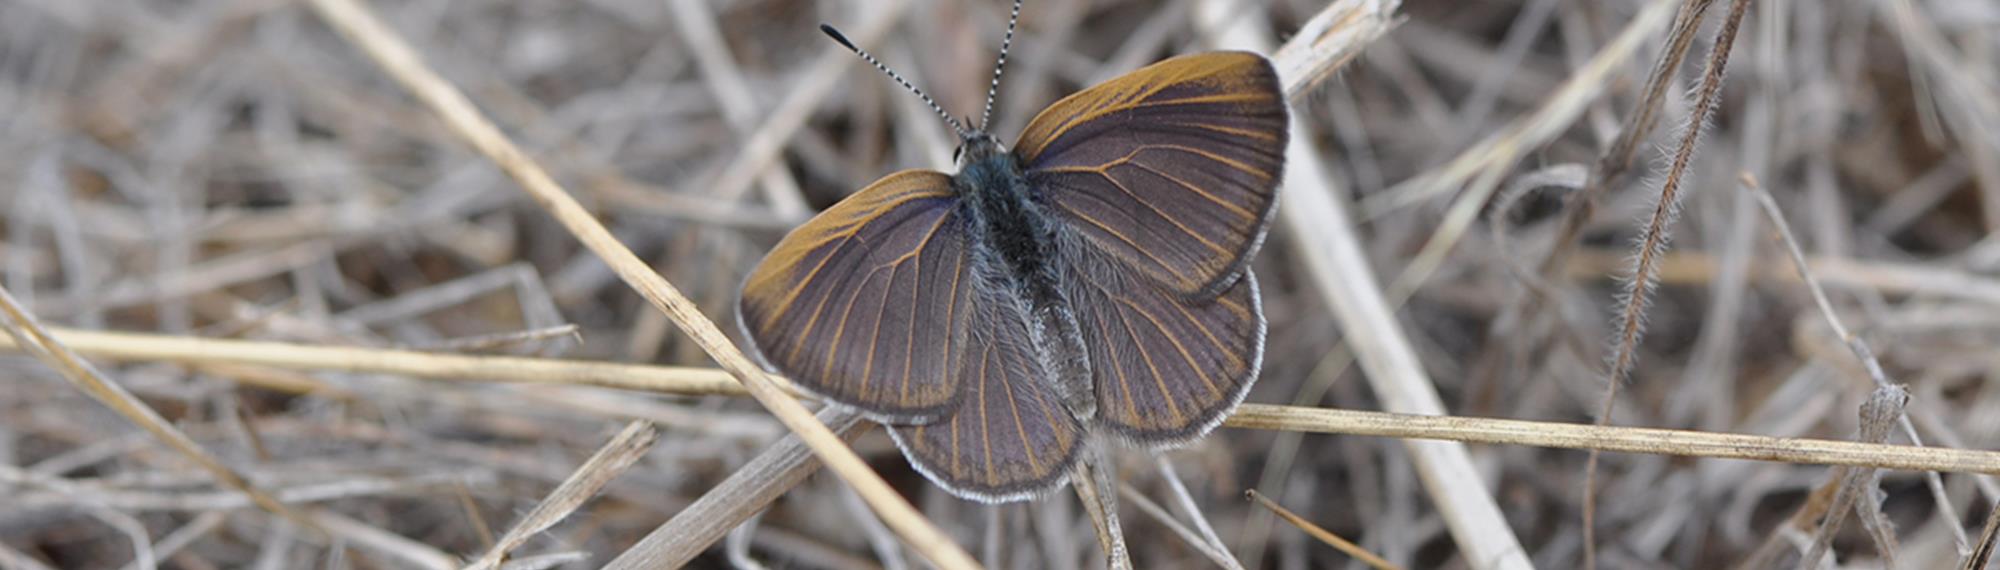 Golden Rayed Blue Butterfly resting with wings spread on dry grass. Its brown with faint iridescent blue suffusion and golden veins.